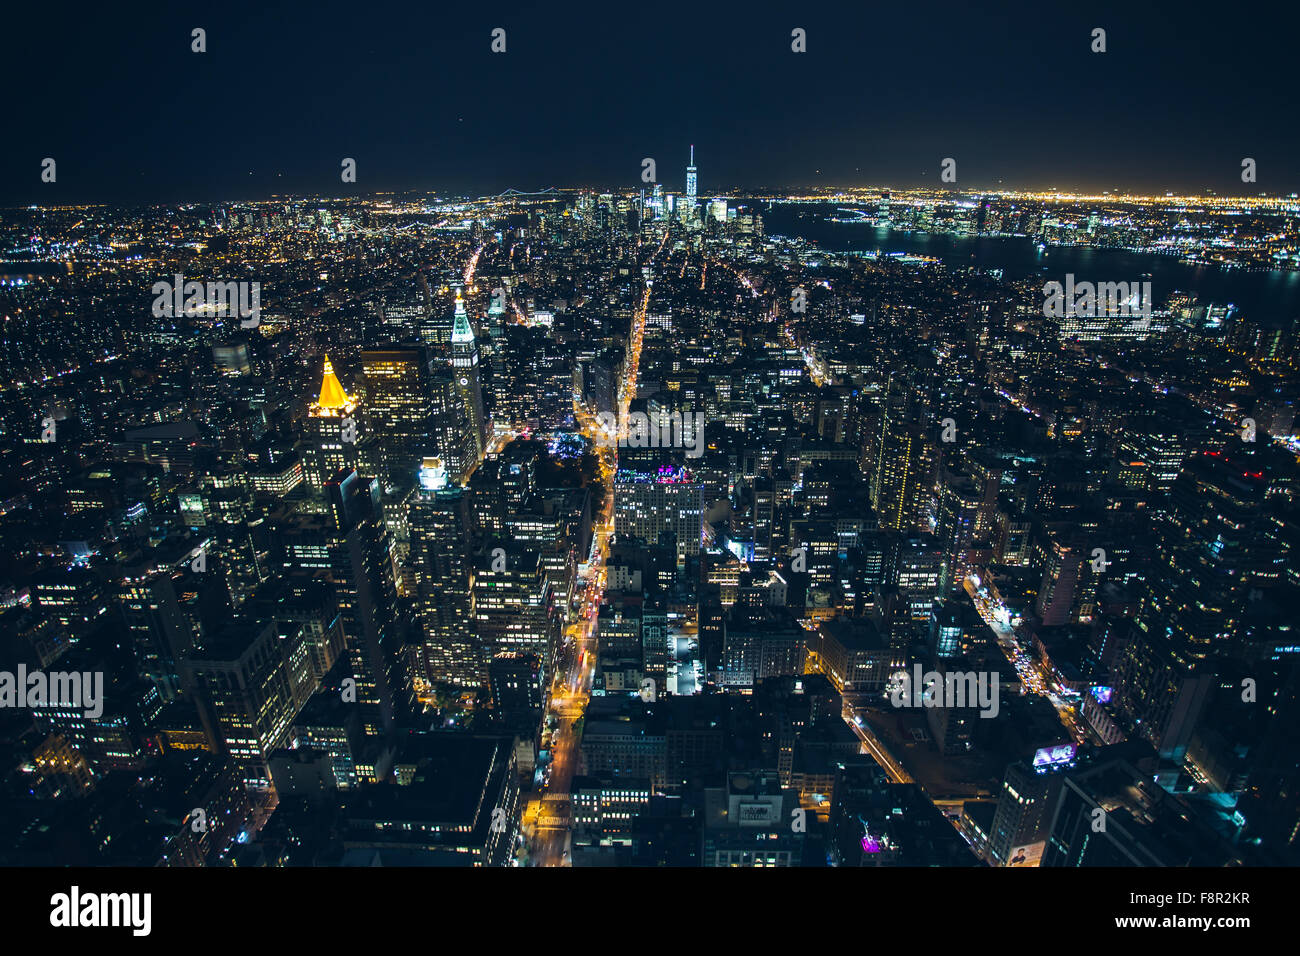 new york city - september 26: Manhattan night view from empire state bulding 5th ave on yhe middle on 26 septemer 2015. Stock Photo